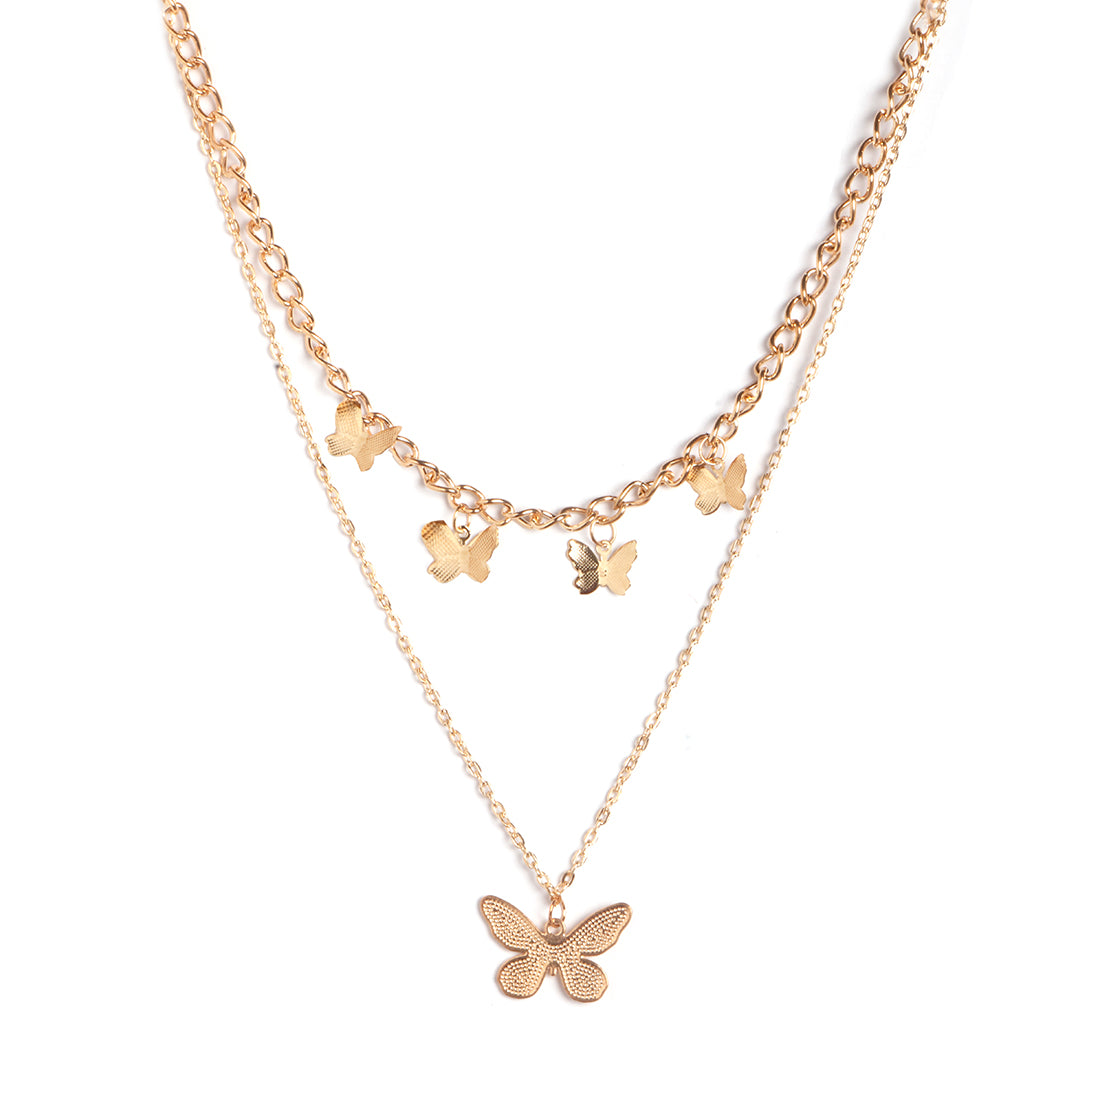 BUTTERFLY PENDANT STATEMENT GOLD-TONED LAYERED NECKLACE